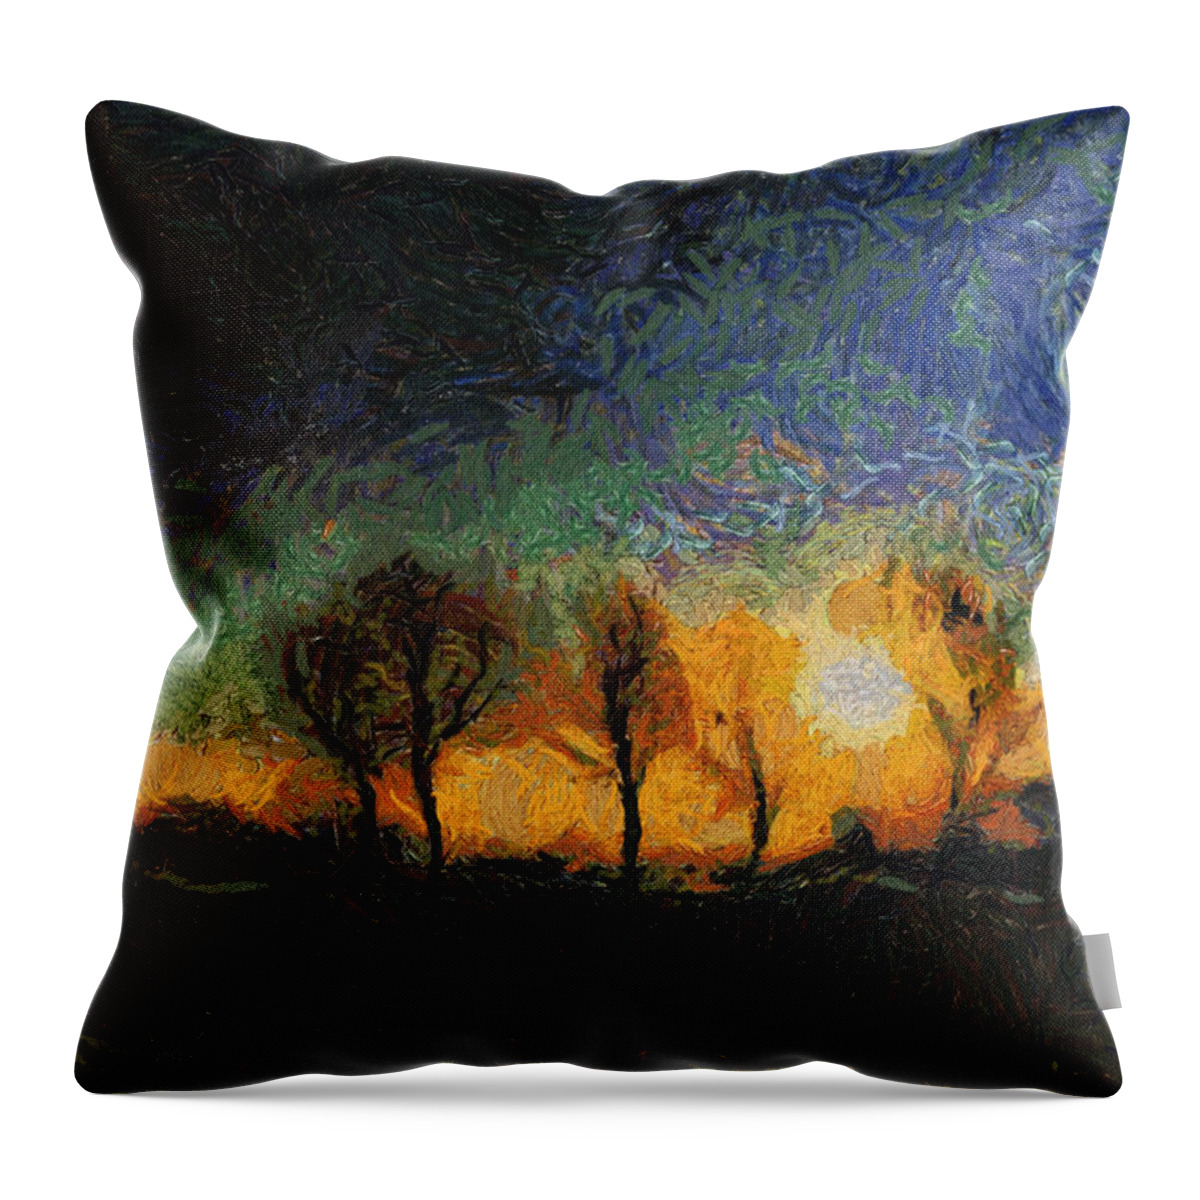 Sunrise Throw Pillow featuring the photograph Tequila Sunrise Photo Art 01 by Thomas Woolworth